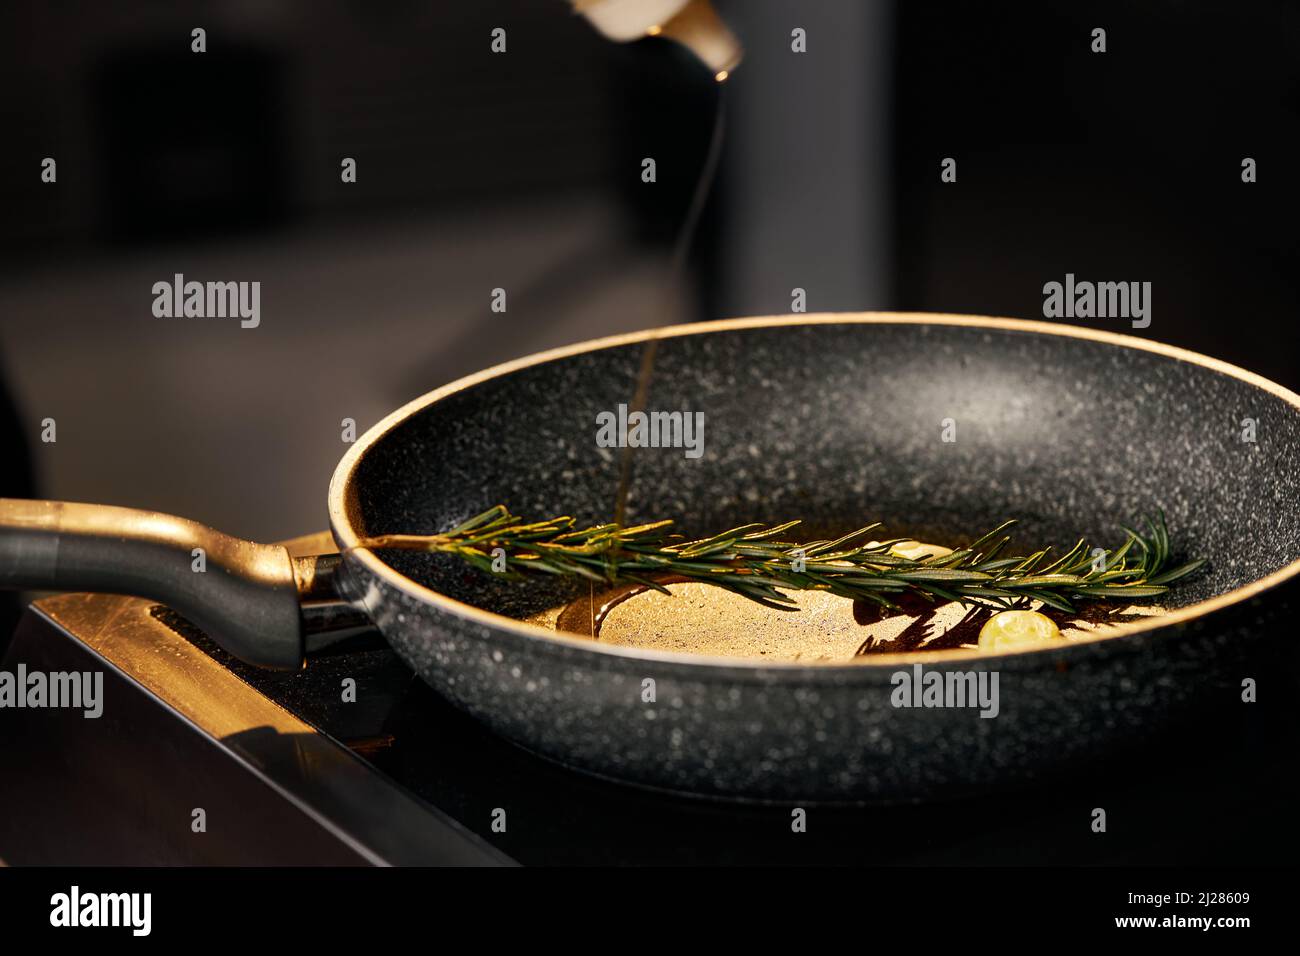 Close view of green, flavored rosemary stick with garlic and oil prepared for roasting. Olive oil pouring in pan with spices for frying on oven in restaurant kitchen. Concept of cooking. Stock Photo